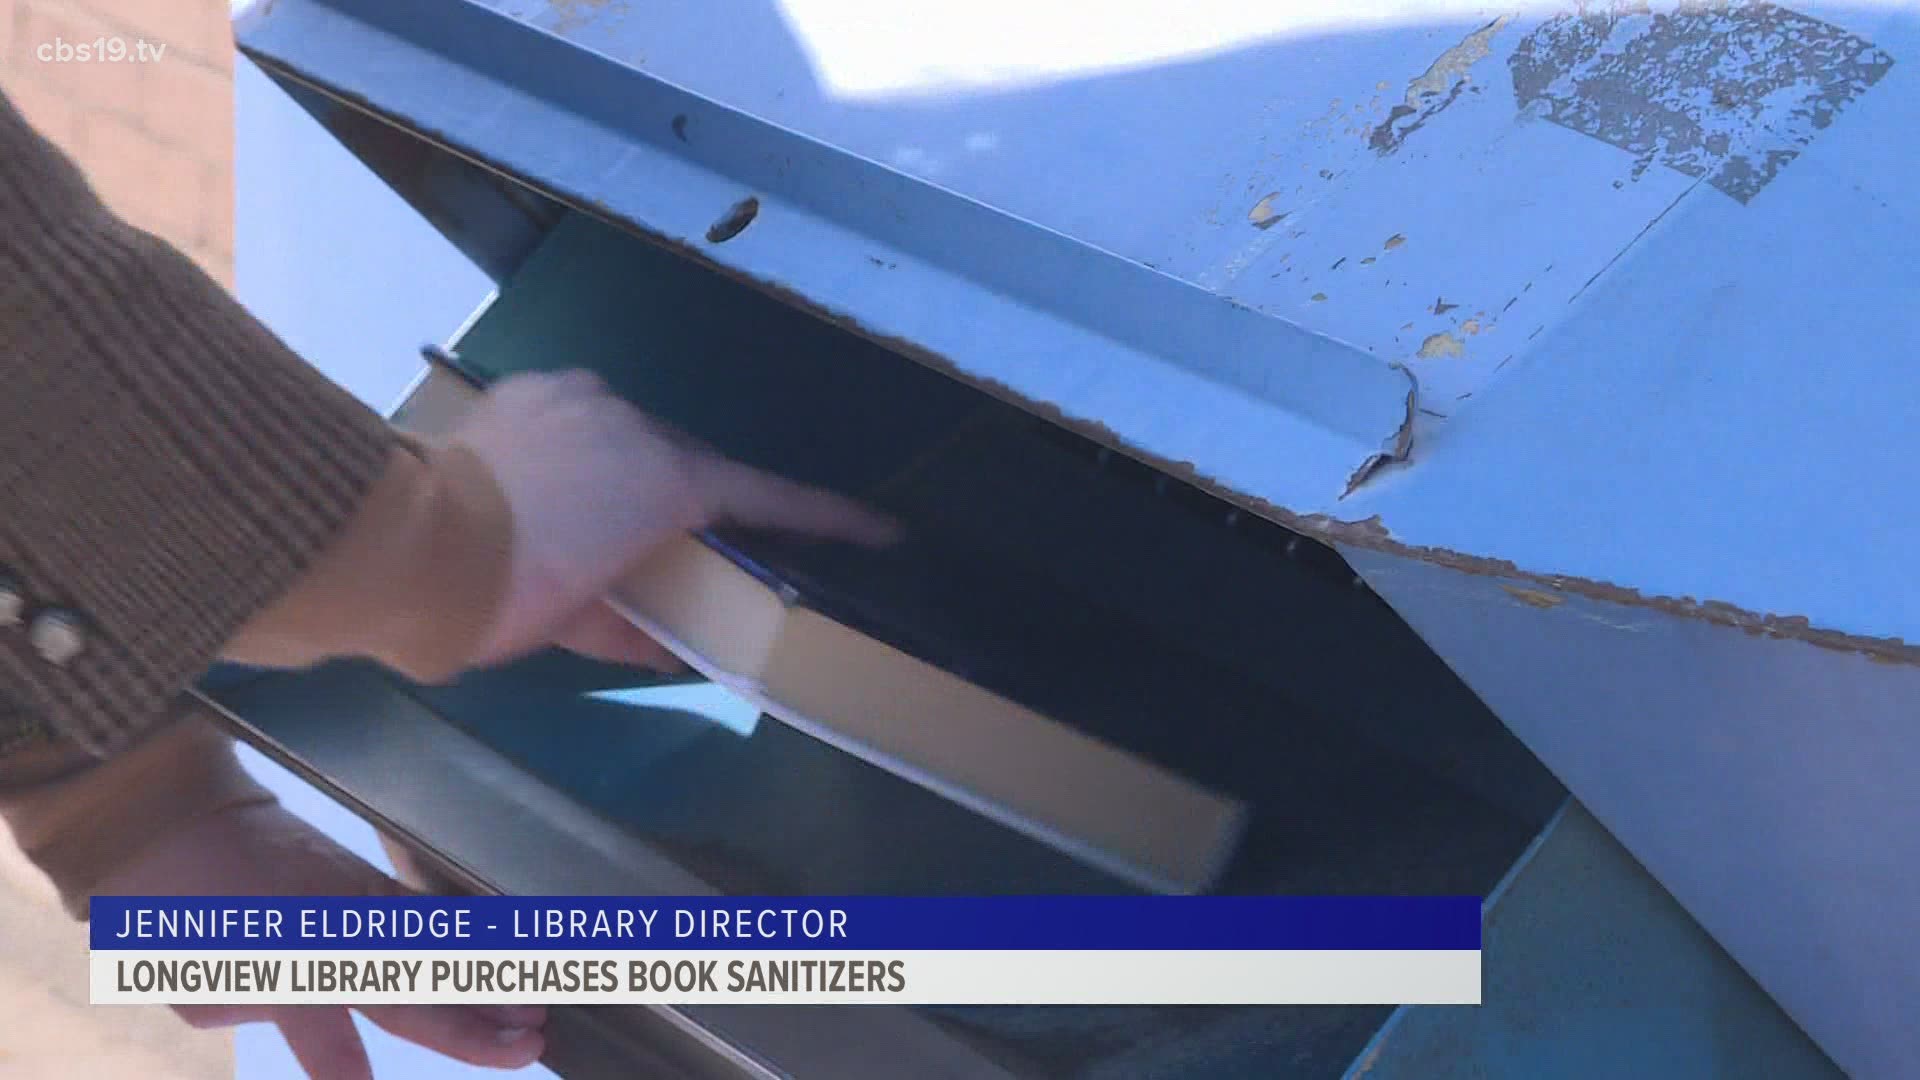 A new device is helping the Longview Public Library ensure books are clear from COVID-19 as well as getting them back on shelves more quickly.